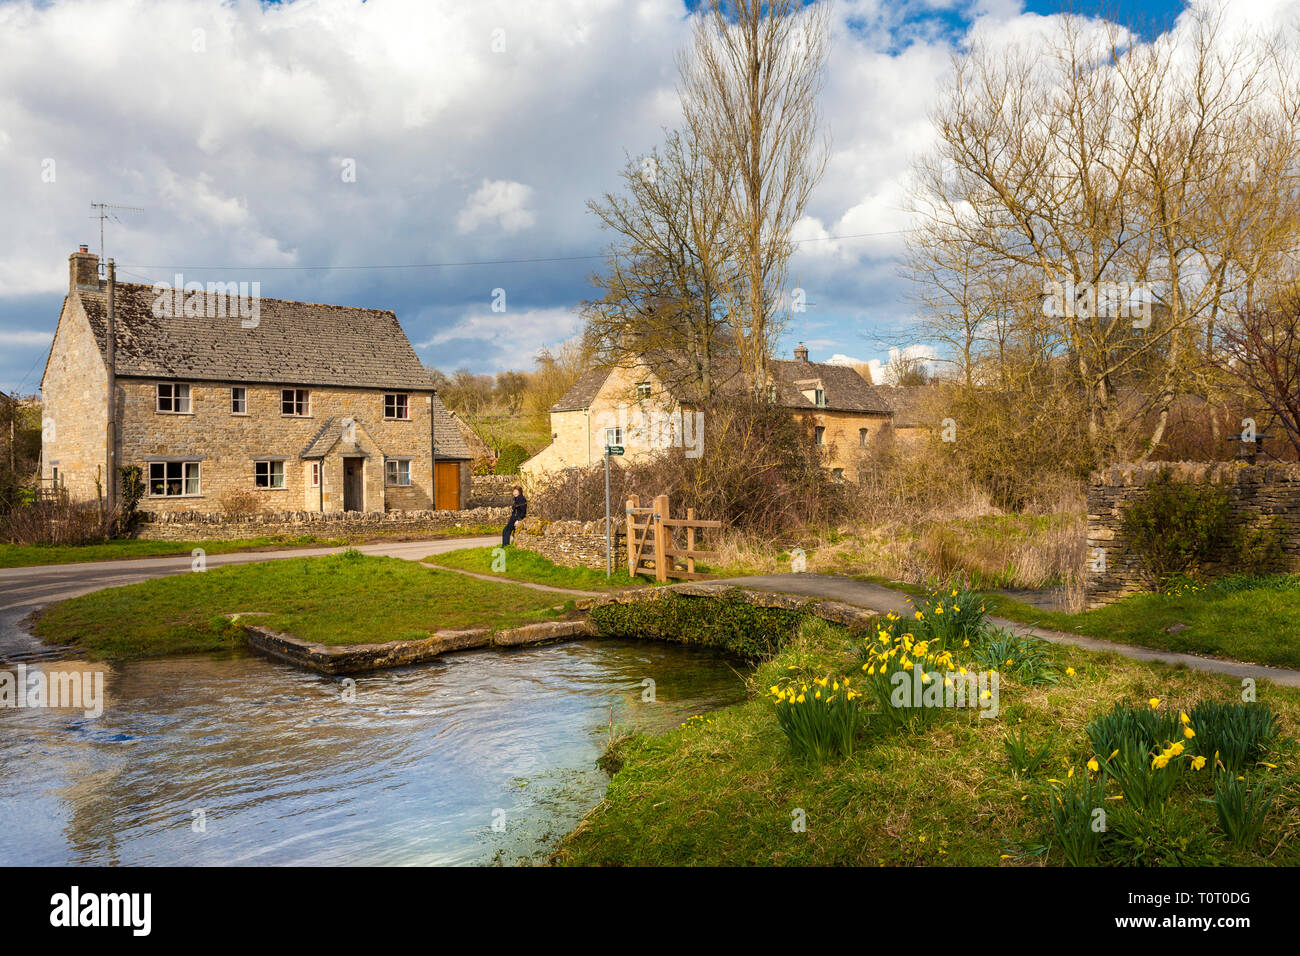 Lower Slaughter is a village in the Cotswold district of Gloucestershire, England, Stock Photo